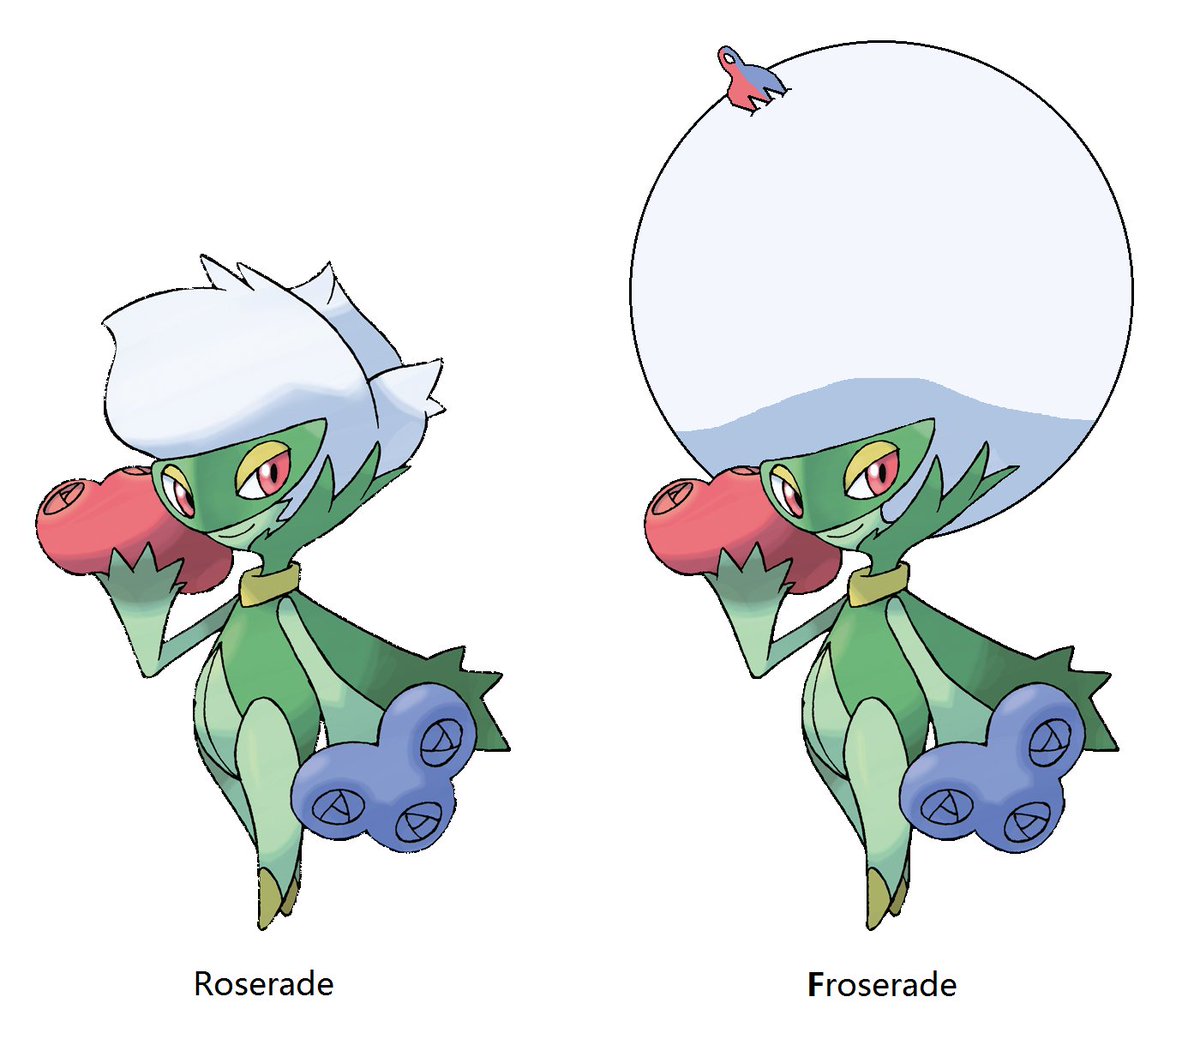 I created this afro edit of Roserade from Pokemon because I couldn't r...